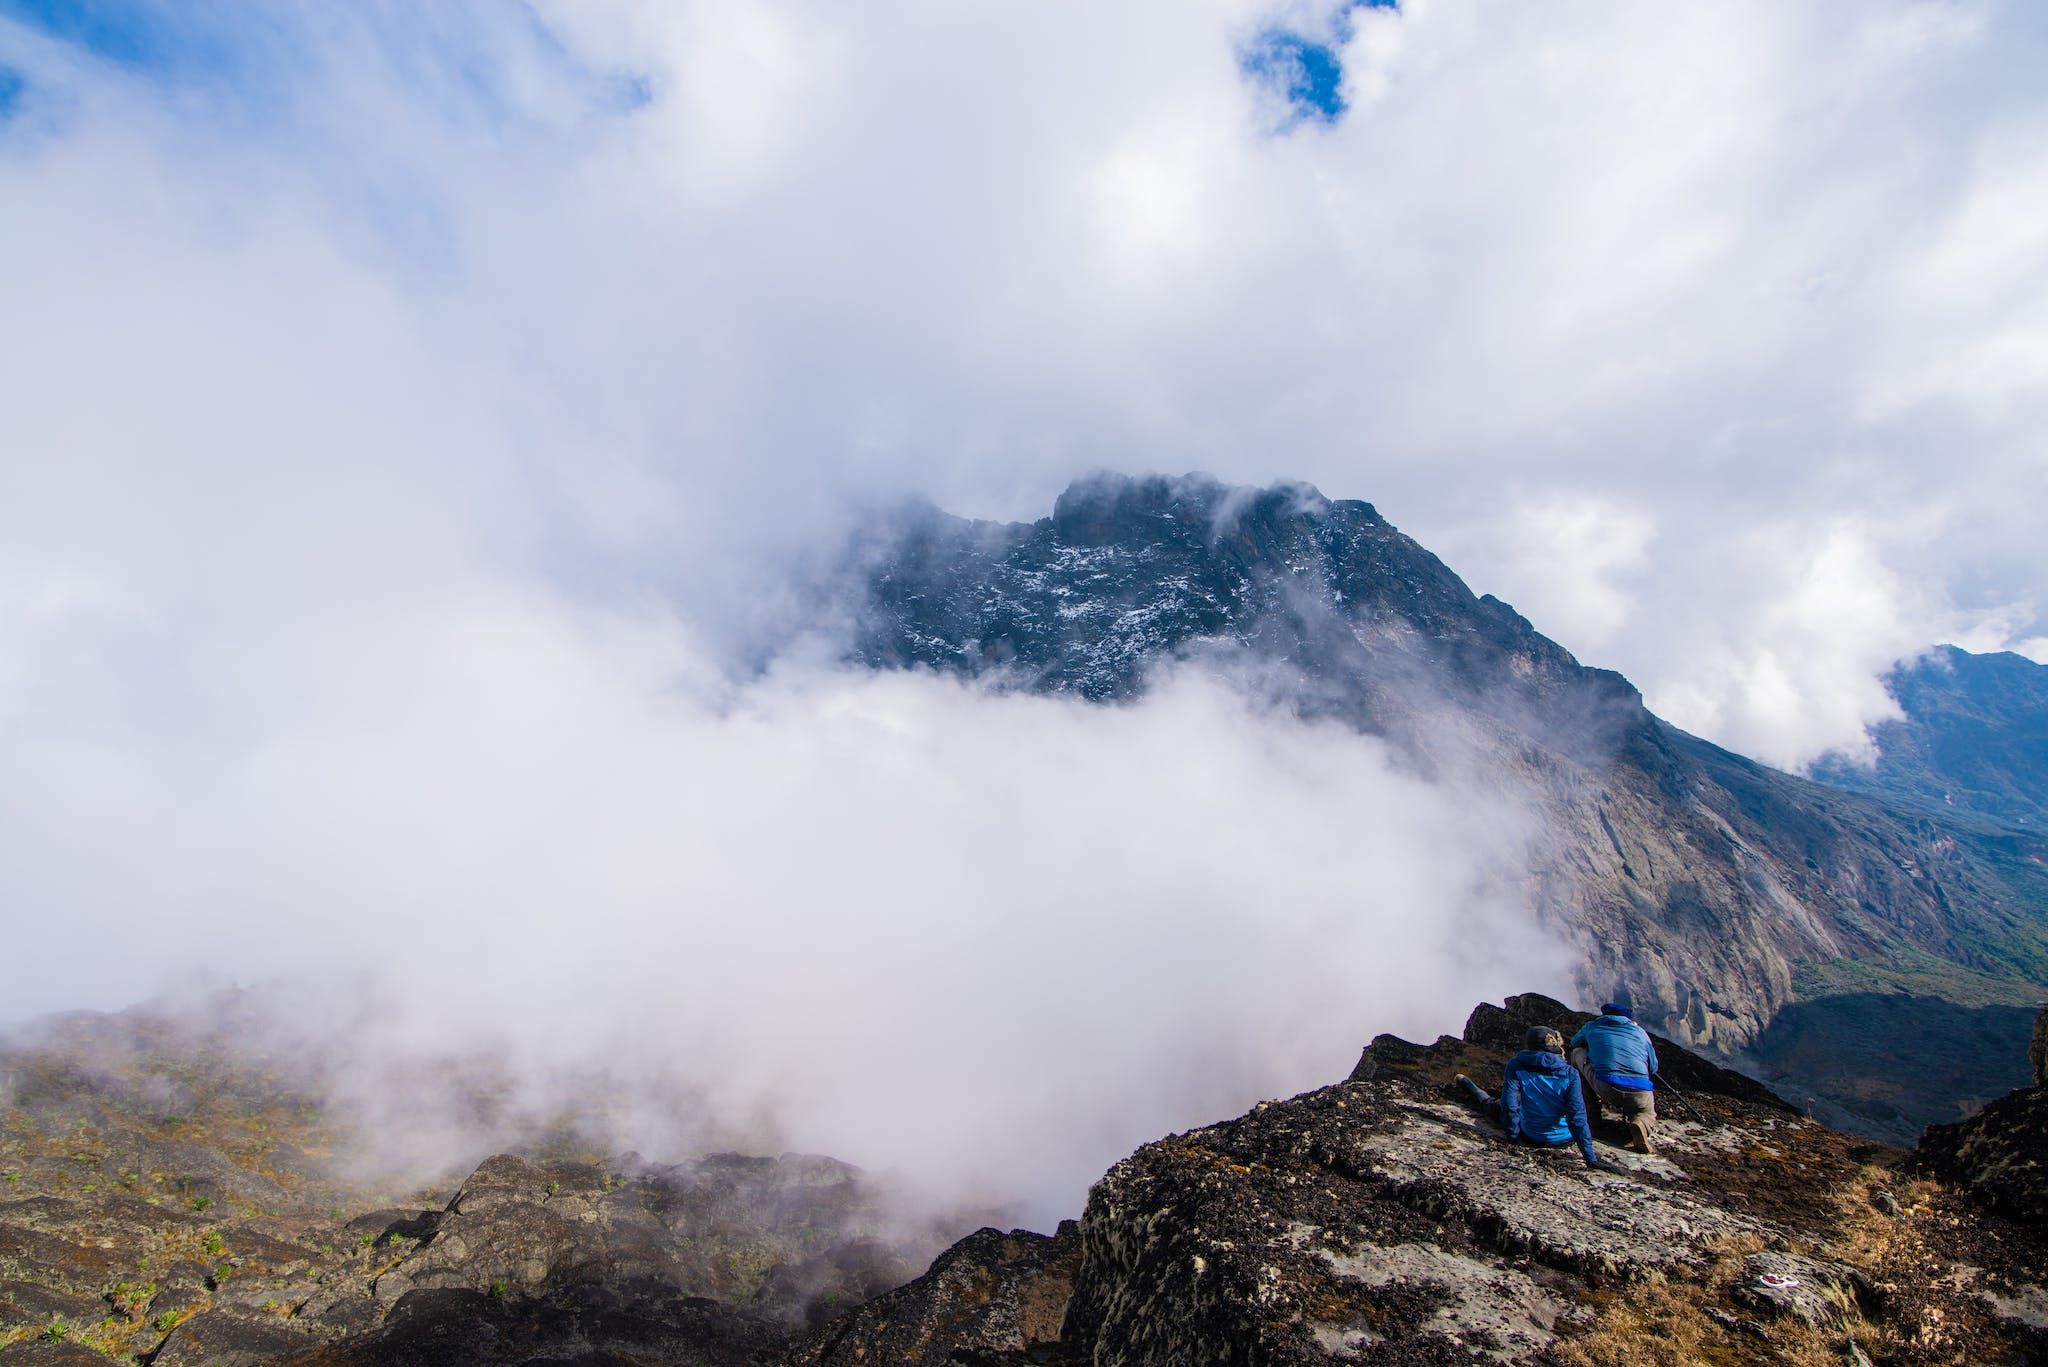 A pair of hikers look out on the vast Rwenzori mountain range, hidden behind a cloud of mist.